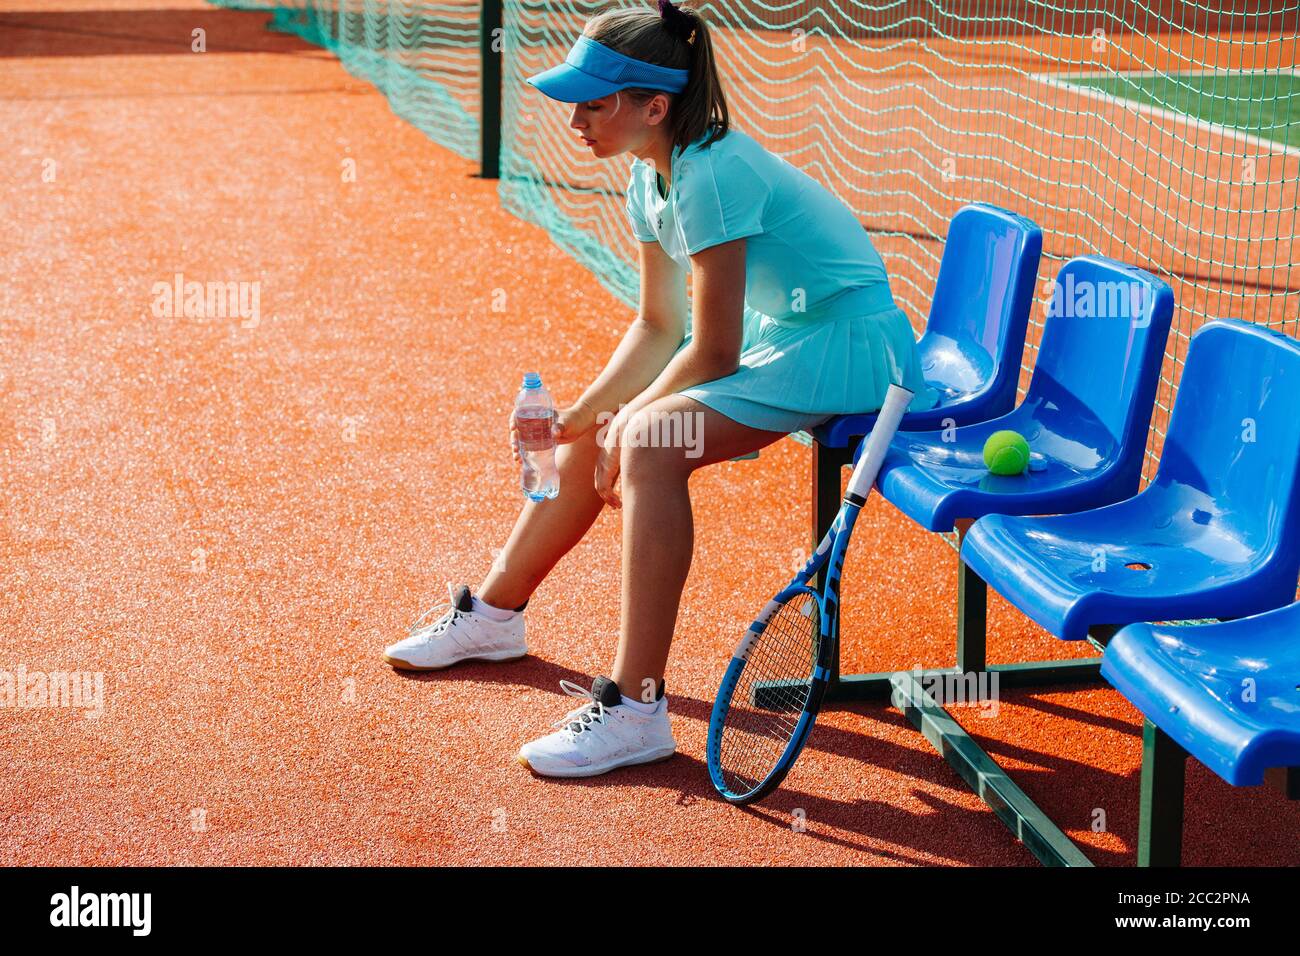 Tired, spent girl sitting on a chair bench next to tennis court, taking break Stock Photo